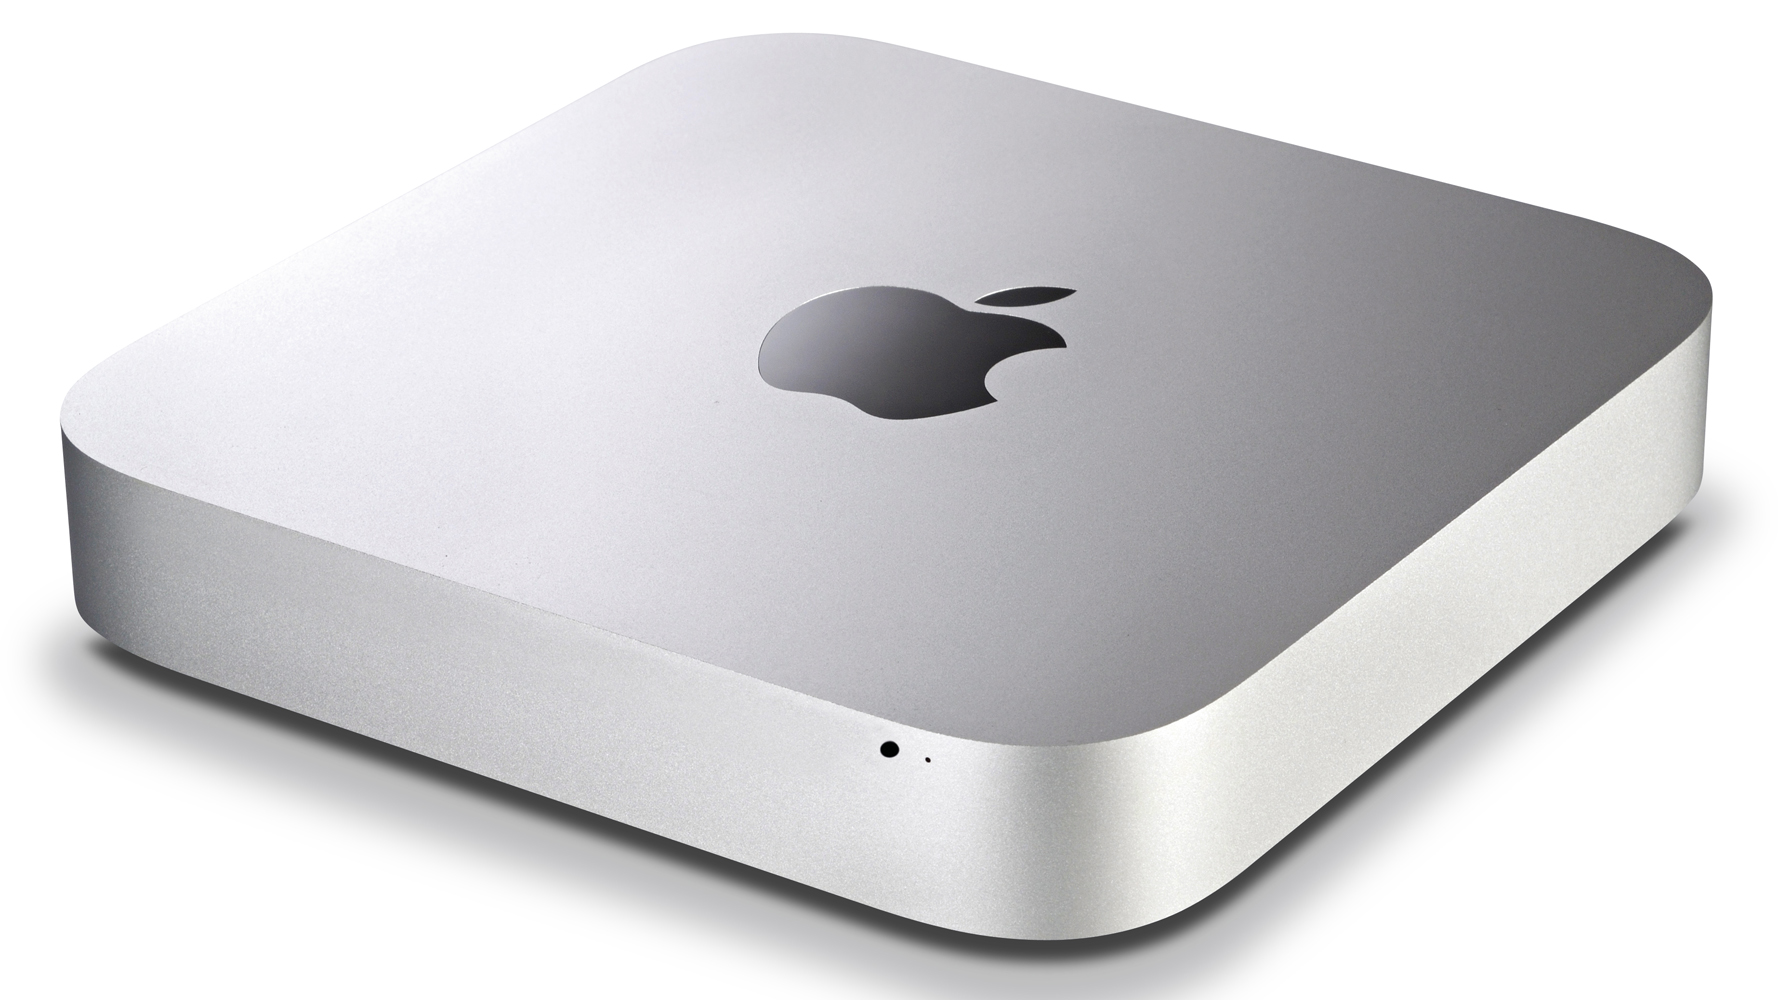 Apple expected to launch new Mac Mini at October event | TechRadar